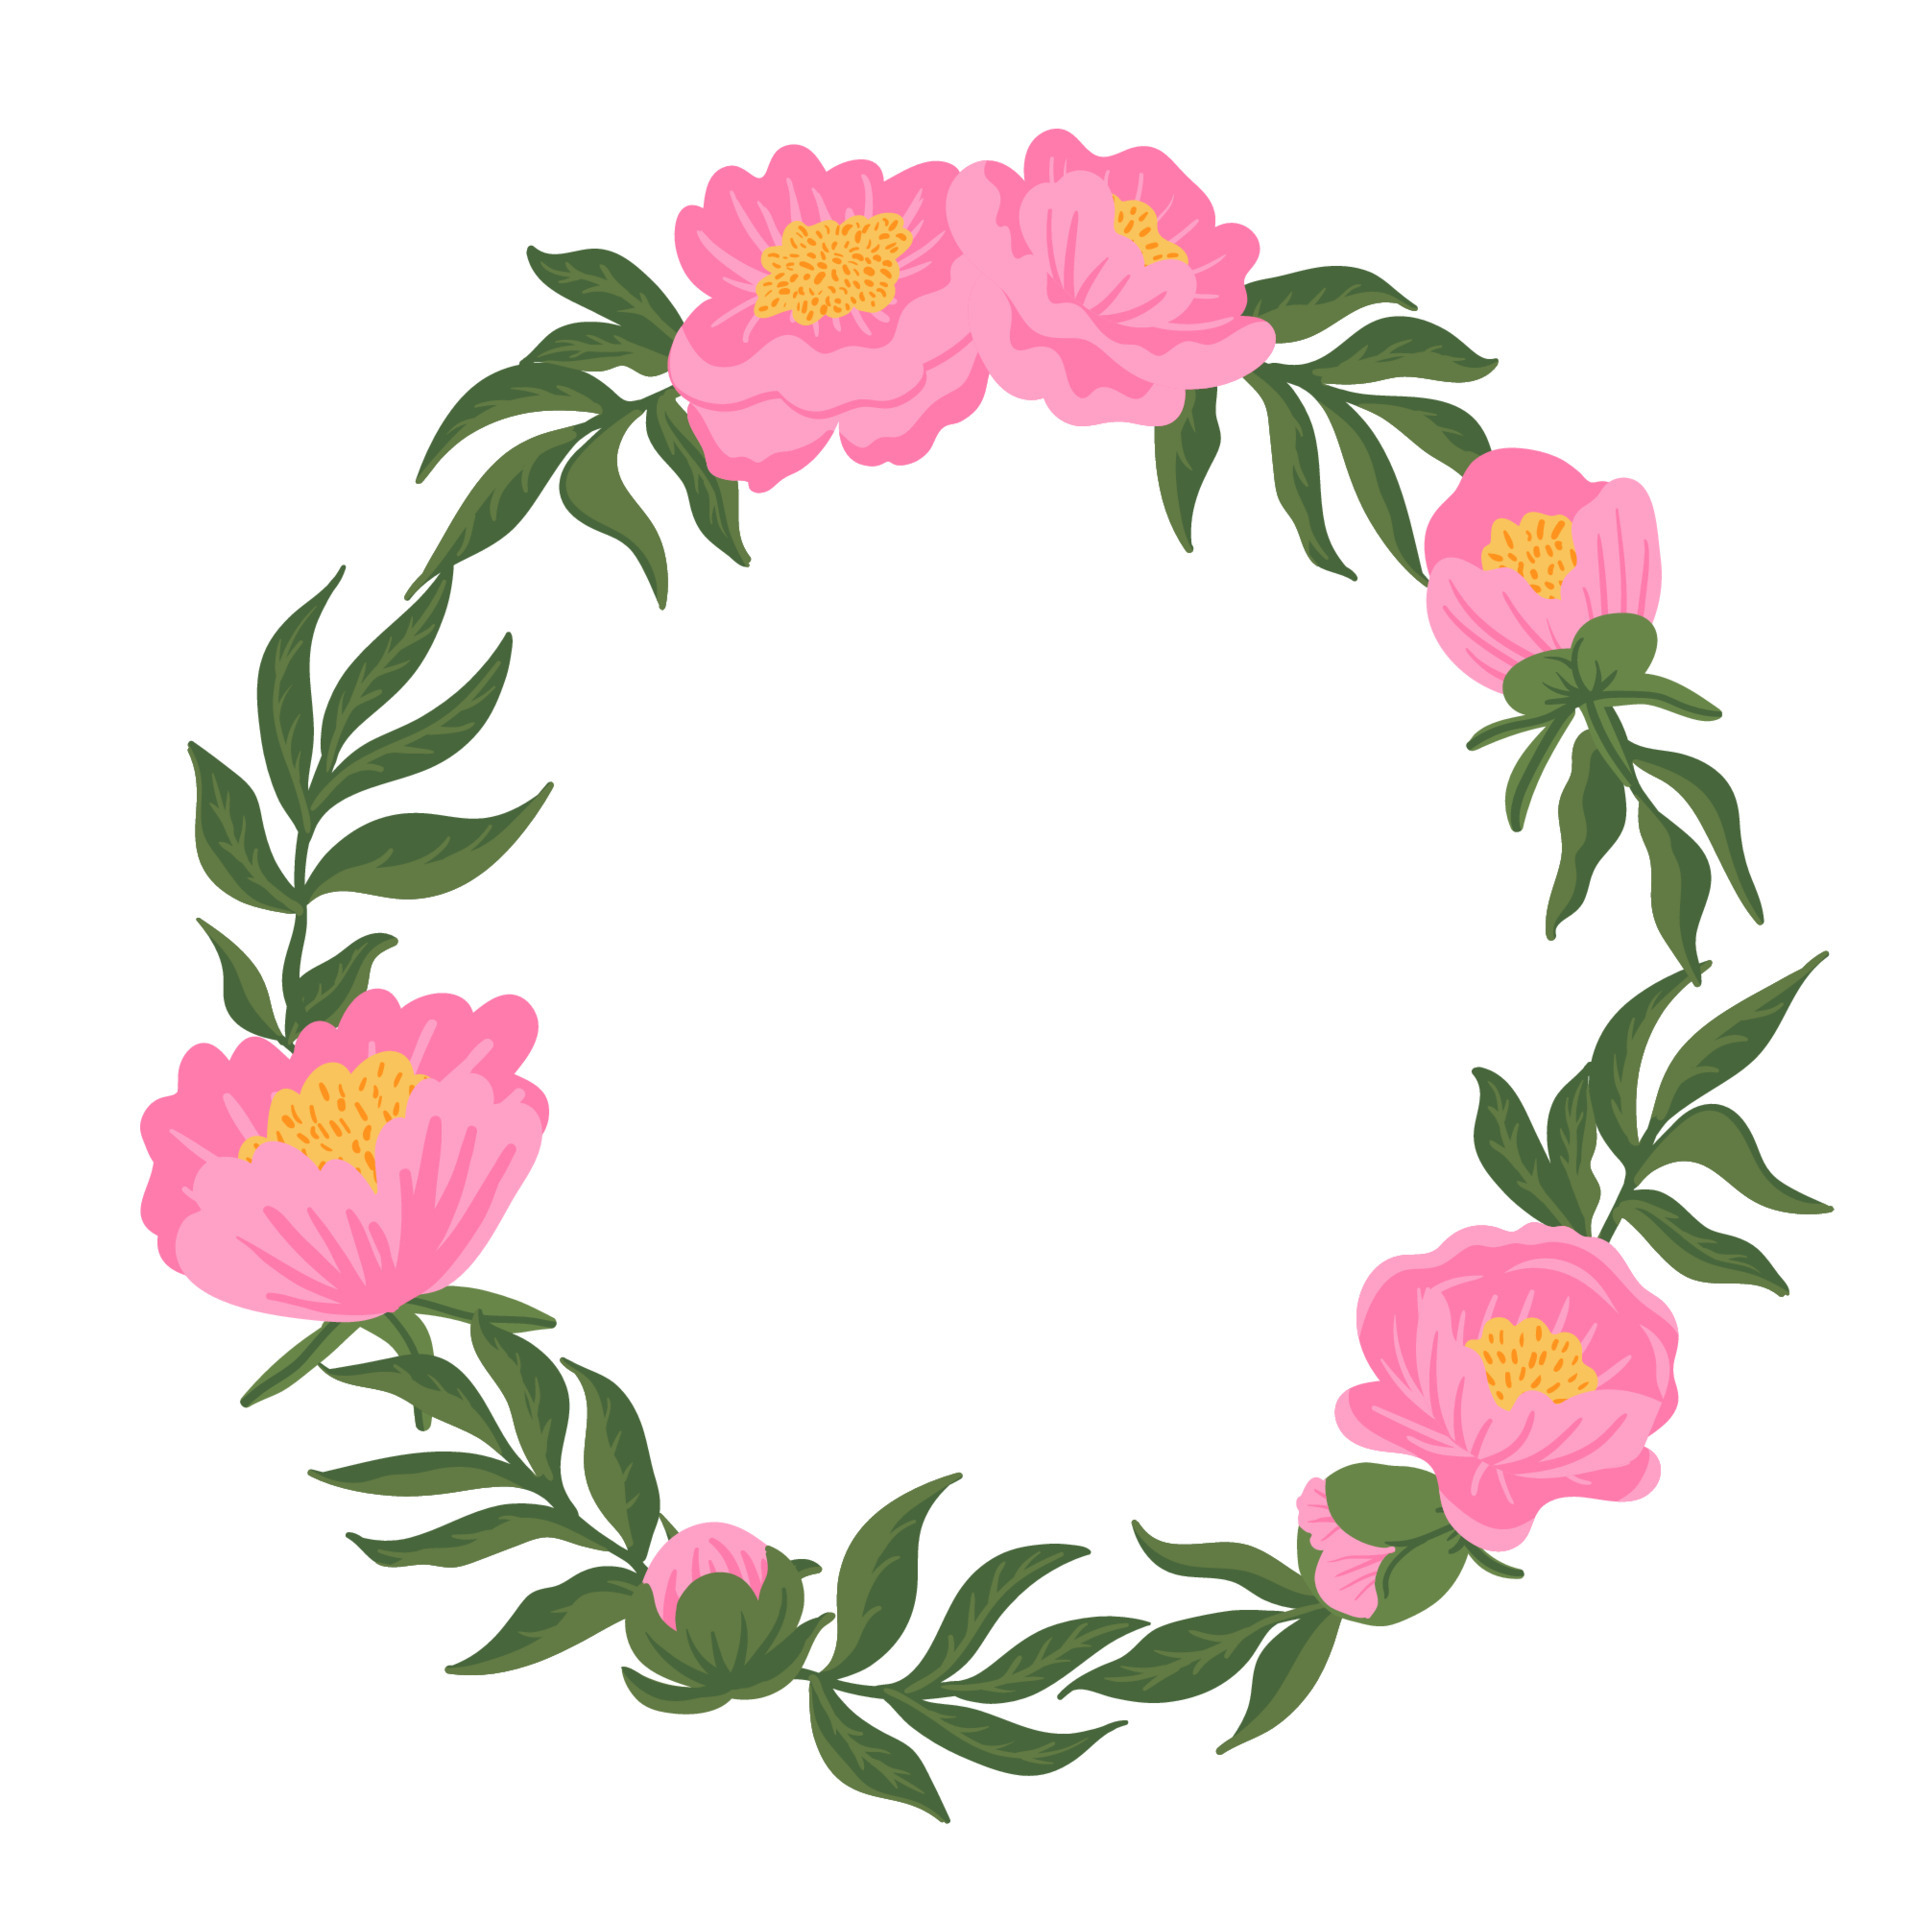 1920x1920 Romantic wreath pink peonies with green leaves. Card template. Isolated flower composition. Vector illustration for wedding invitation, patterns, wallpapers, fabric, wrapping. 4715177 Vector Art